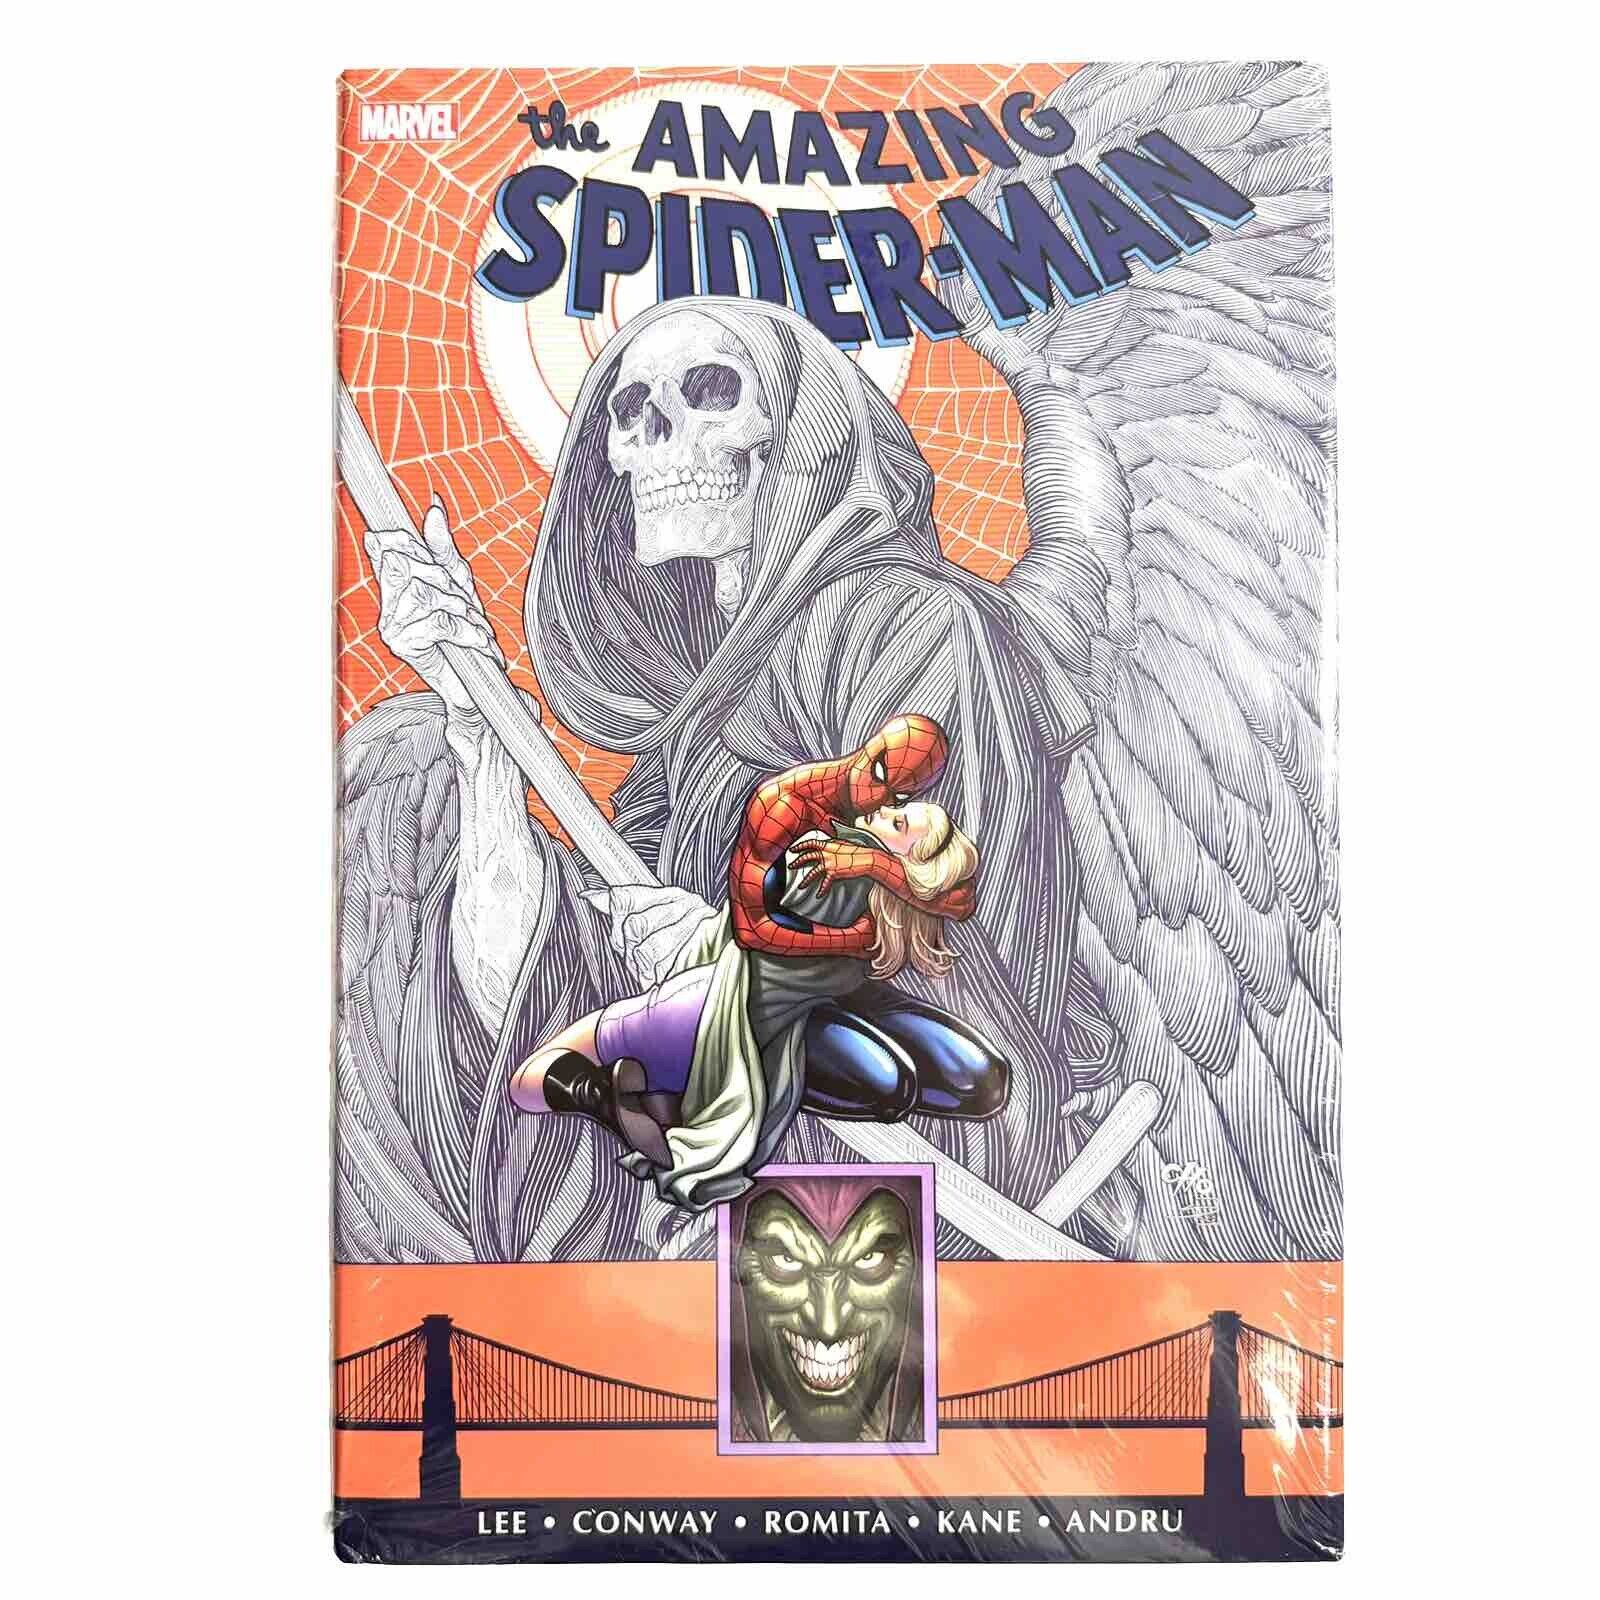 The Amazing Spider-Man Omnibus Vol 4 New Sealed $5 Flat Combined Shipping